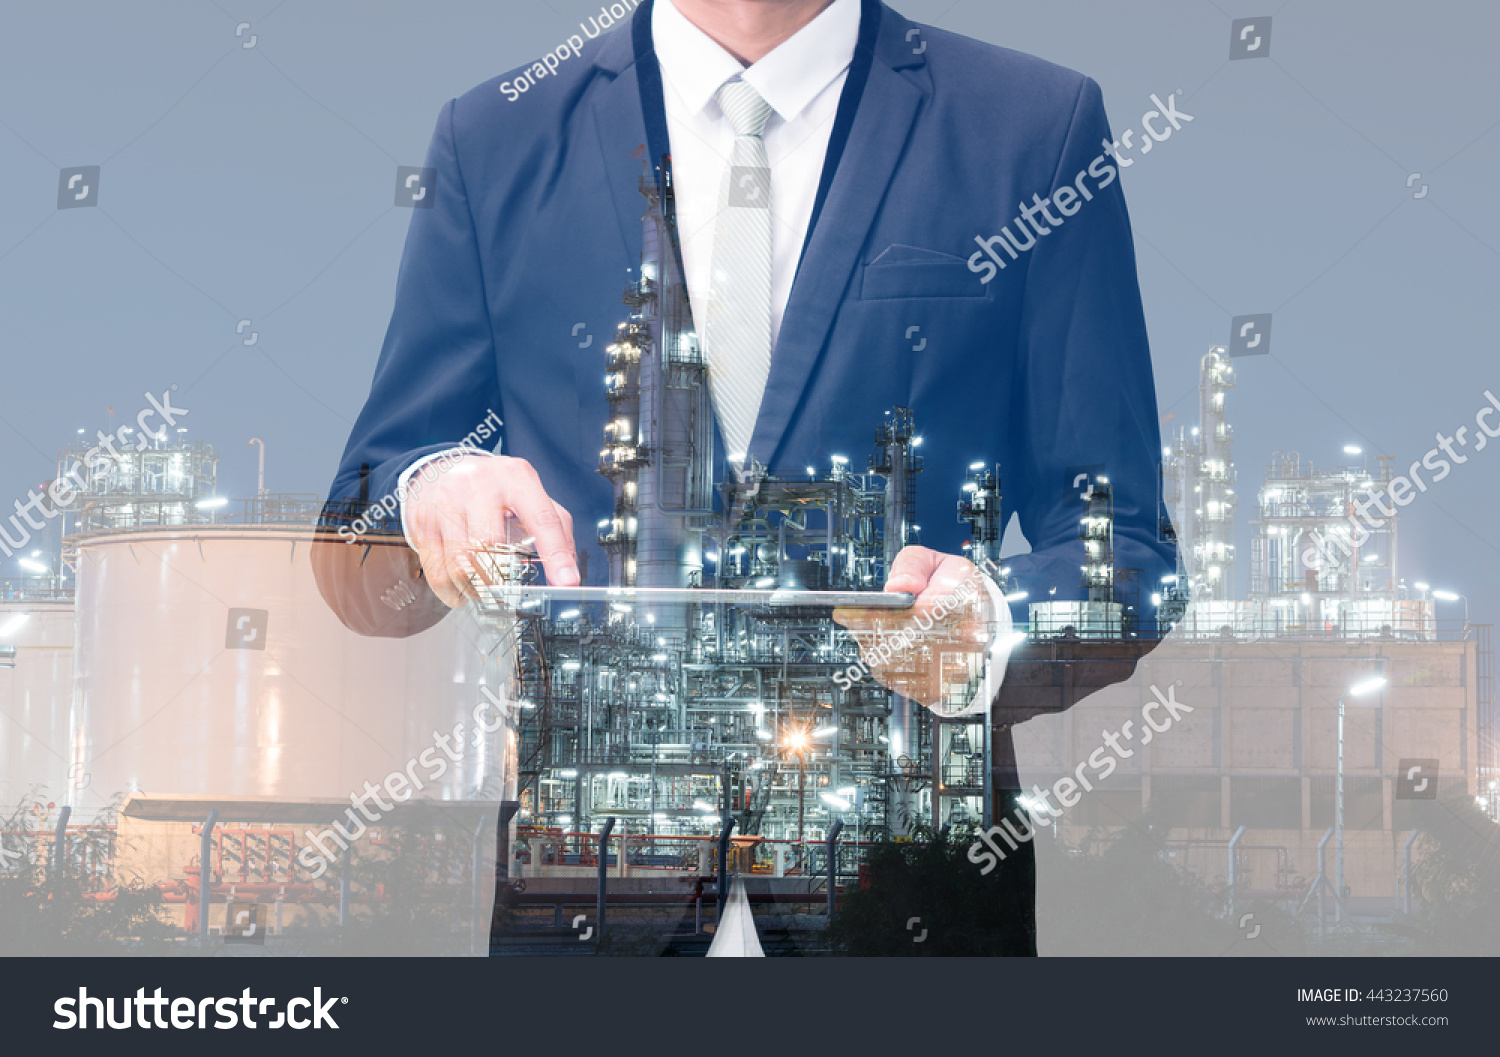 ... hold tablet, oil refinery industry plant, Petroleum energy concept